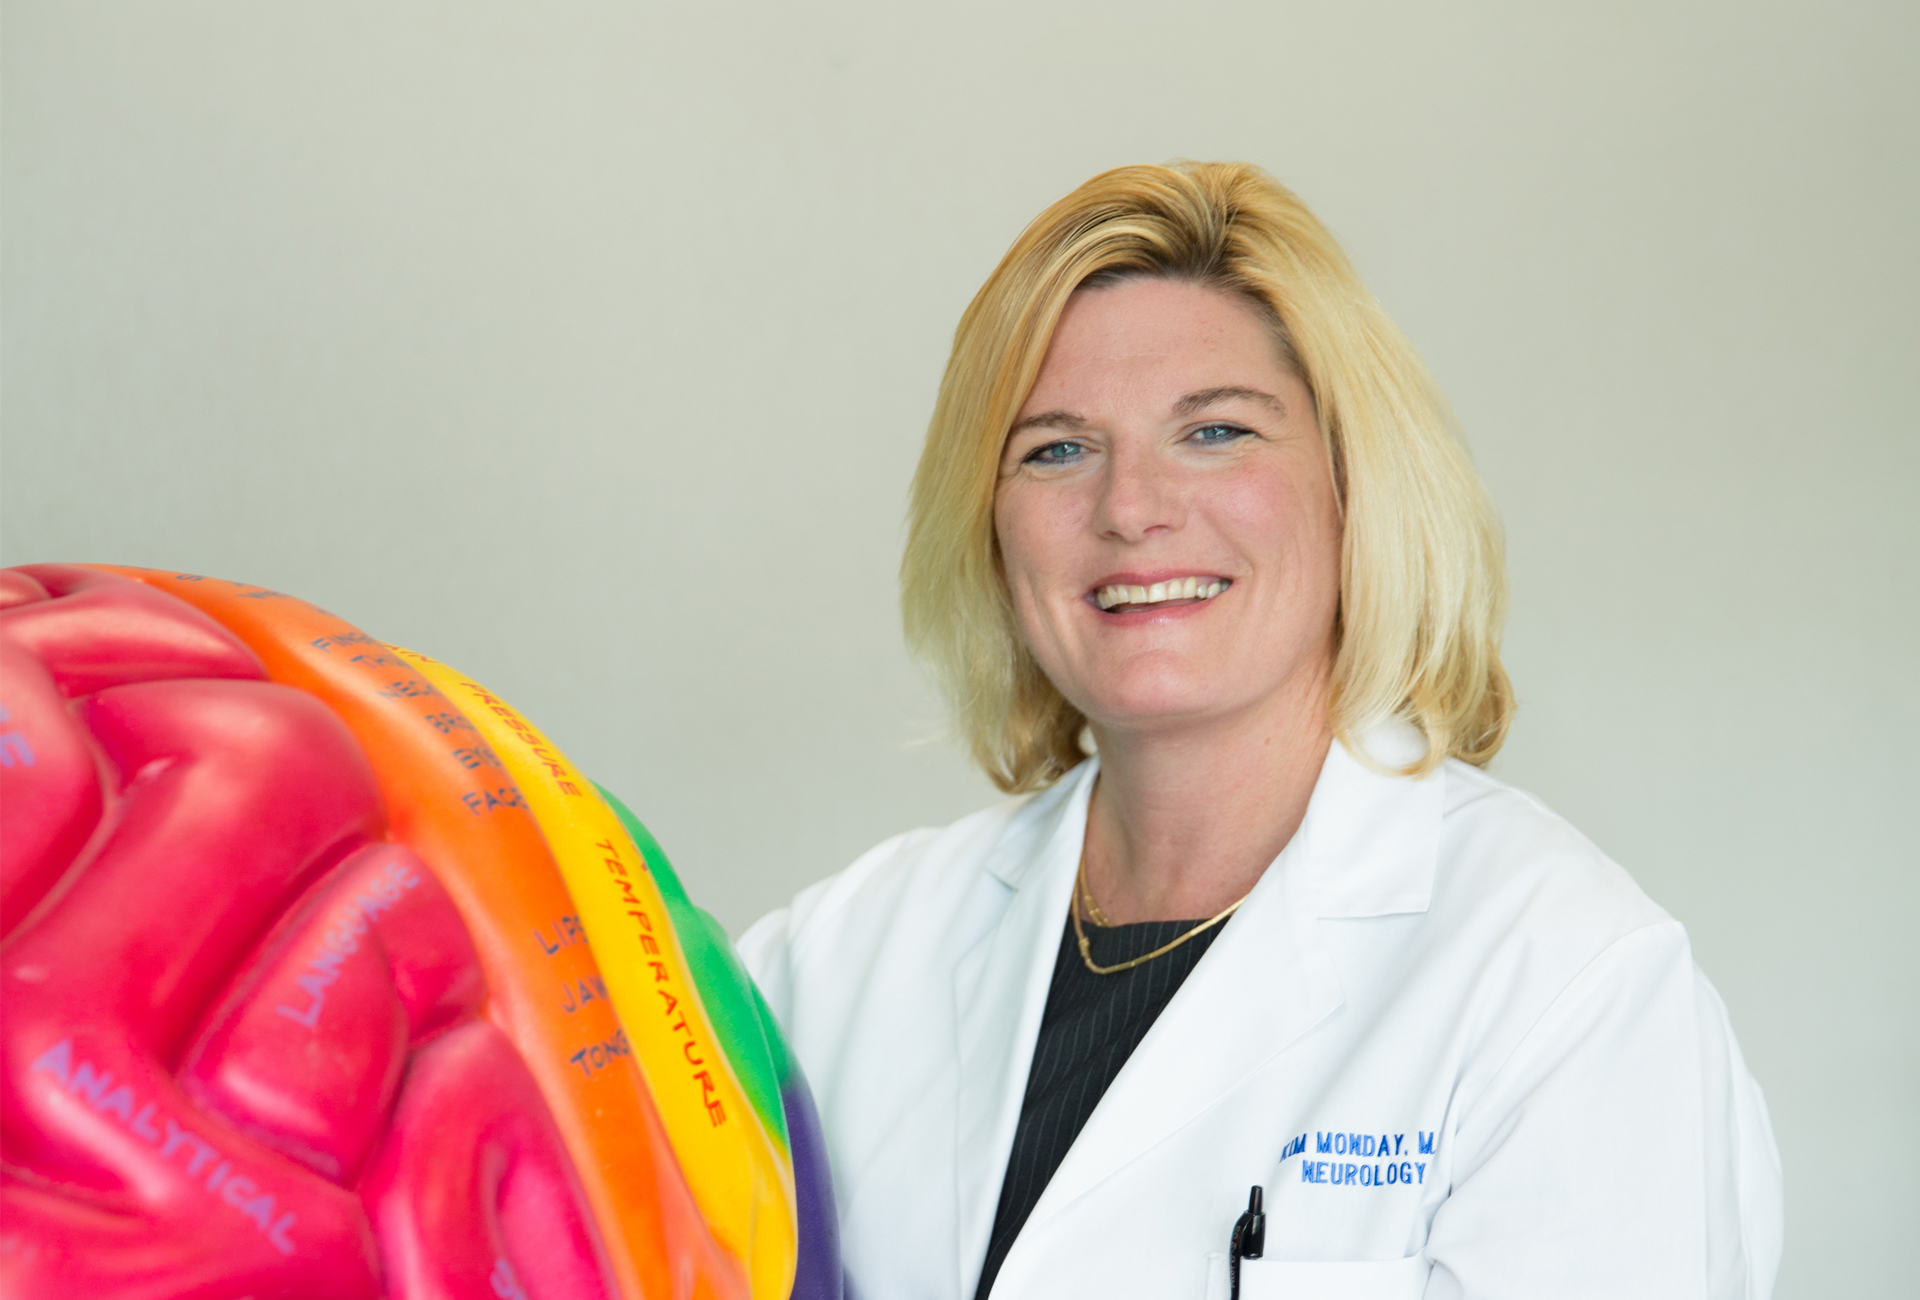 Portrait of Dr. Kimberly Monday standing next to a colorful plastic model of a brain.